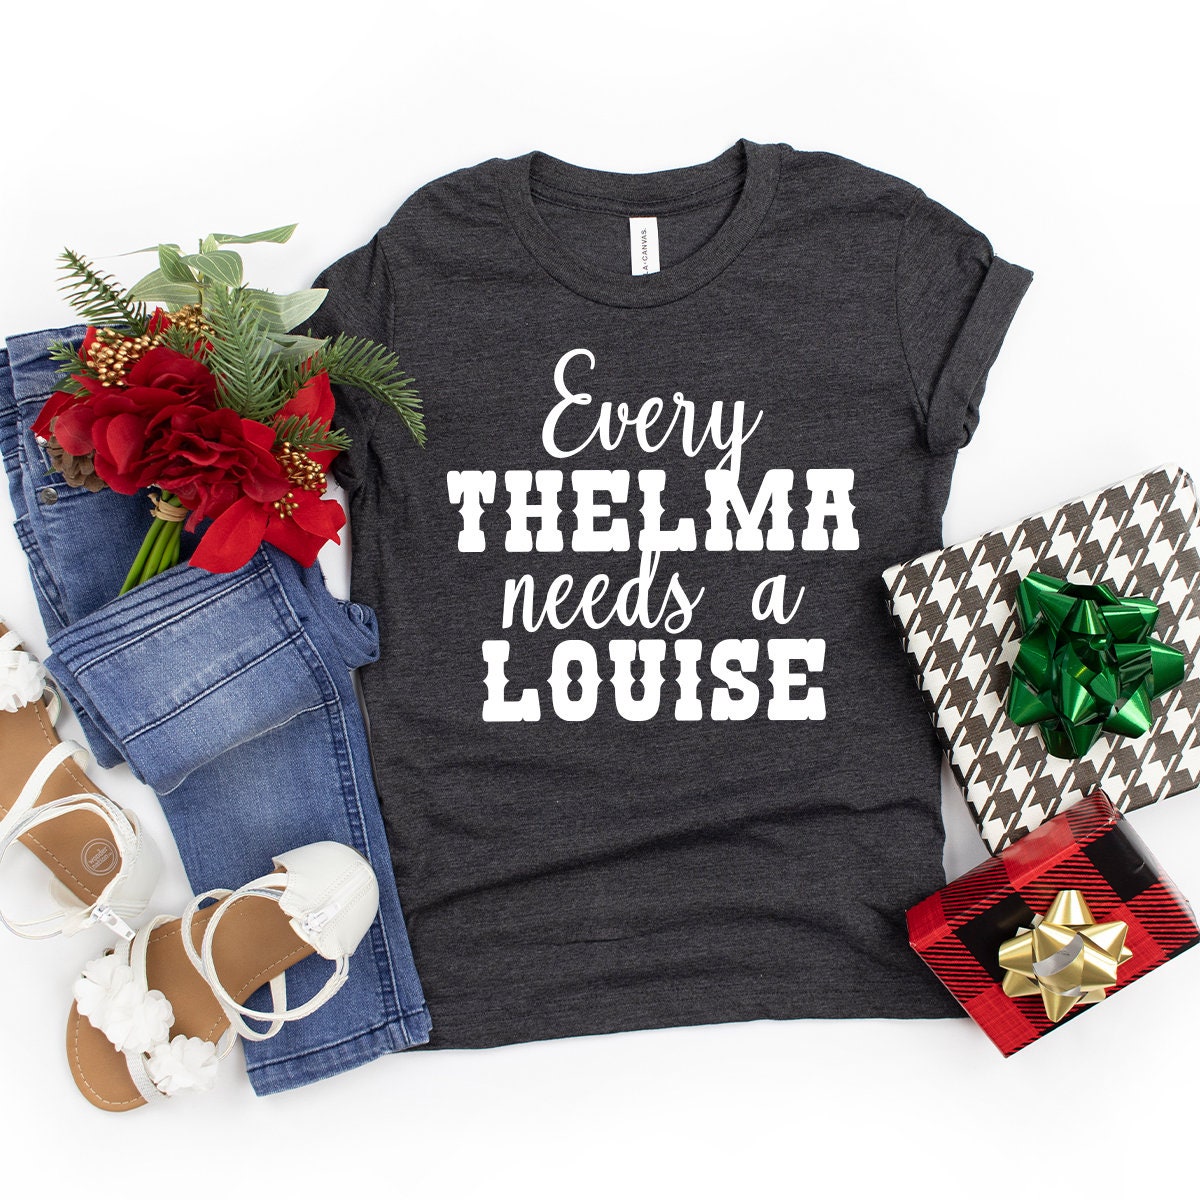 Thelma and Louise, Best Friends Shirt, Every Thelma Needs a Louise TShirt,  Ride or Die, Matching Shirts, Best Friend Gift, Bestie Gift, Gift for